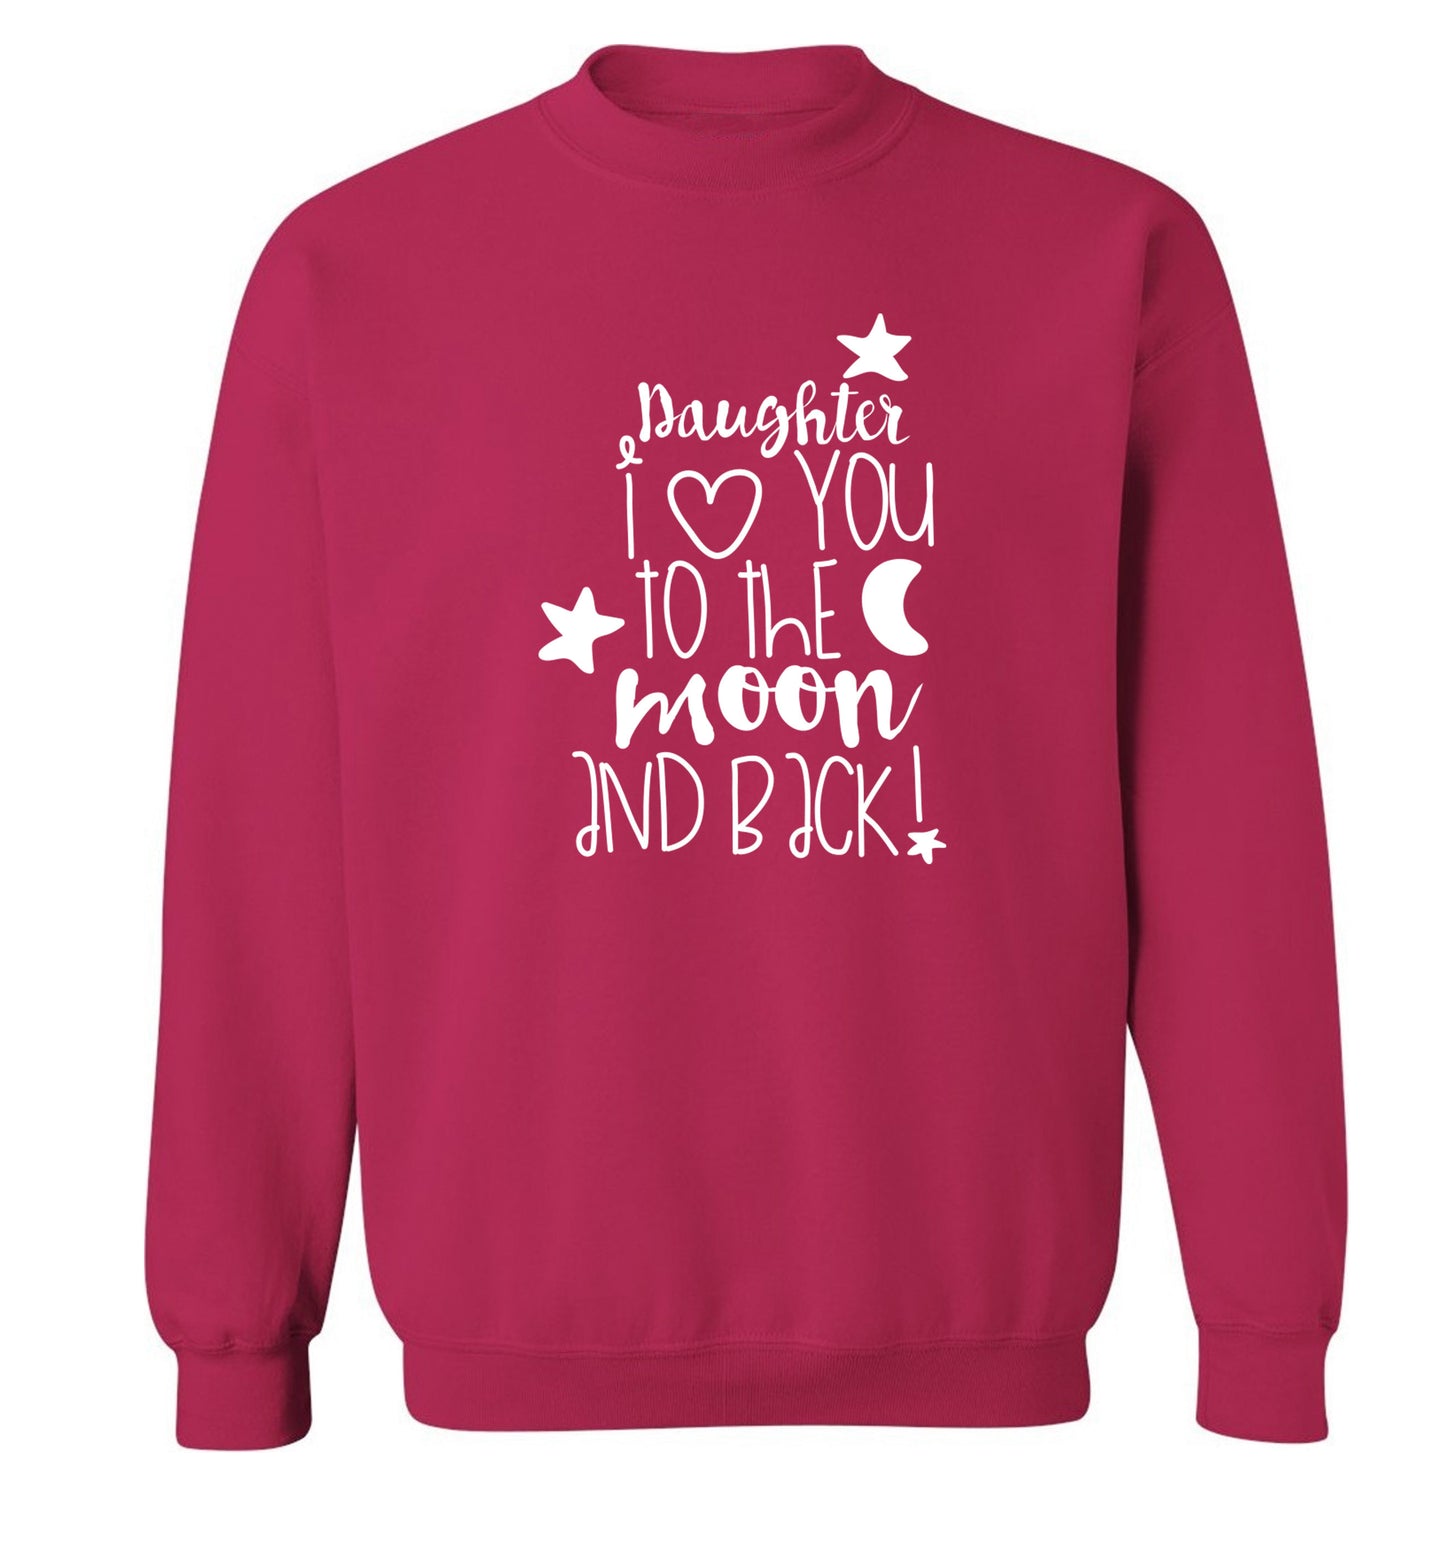 Daughter I love you to the moon and back Adult's unisex pink  sweater XL